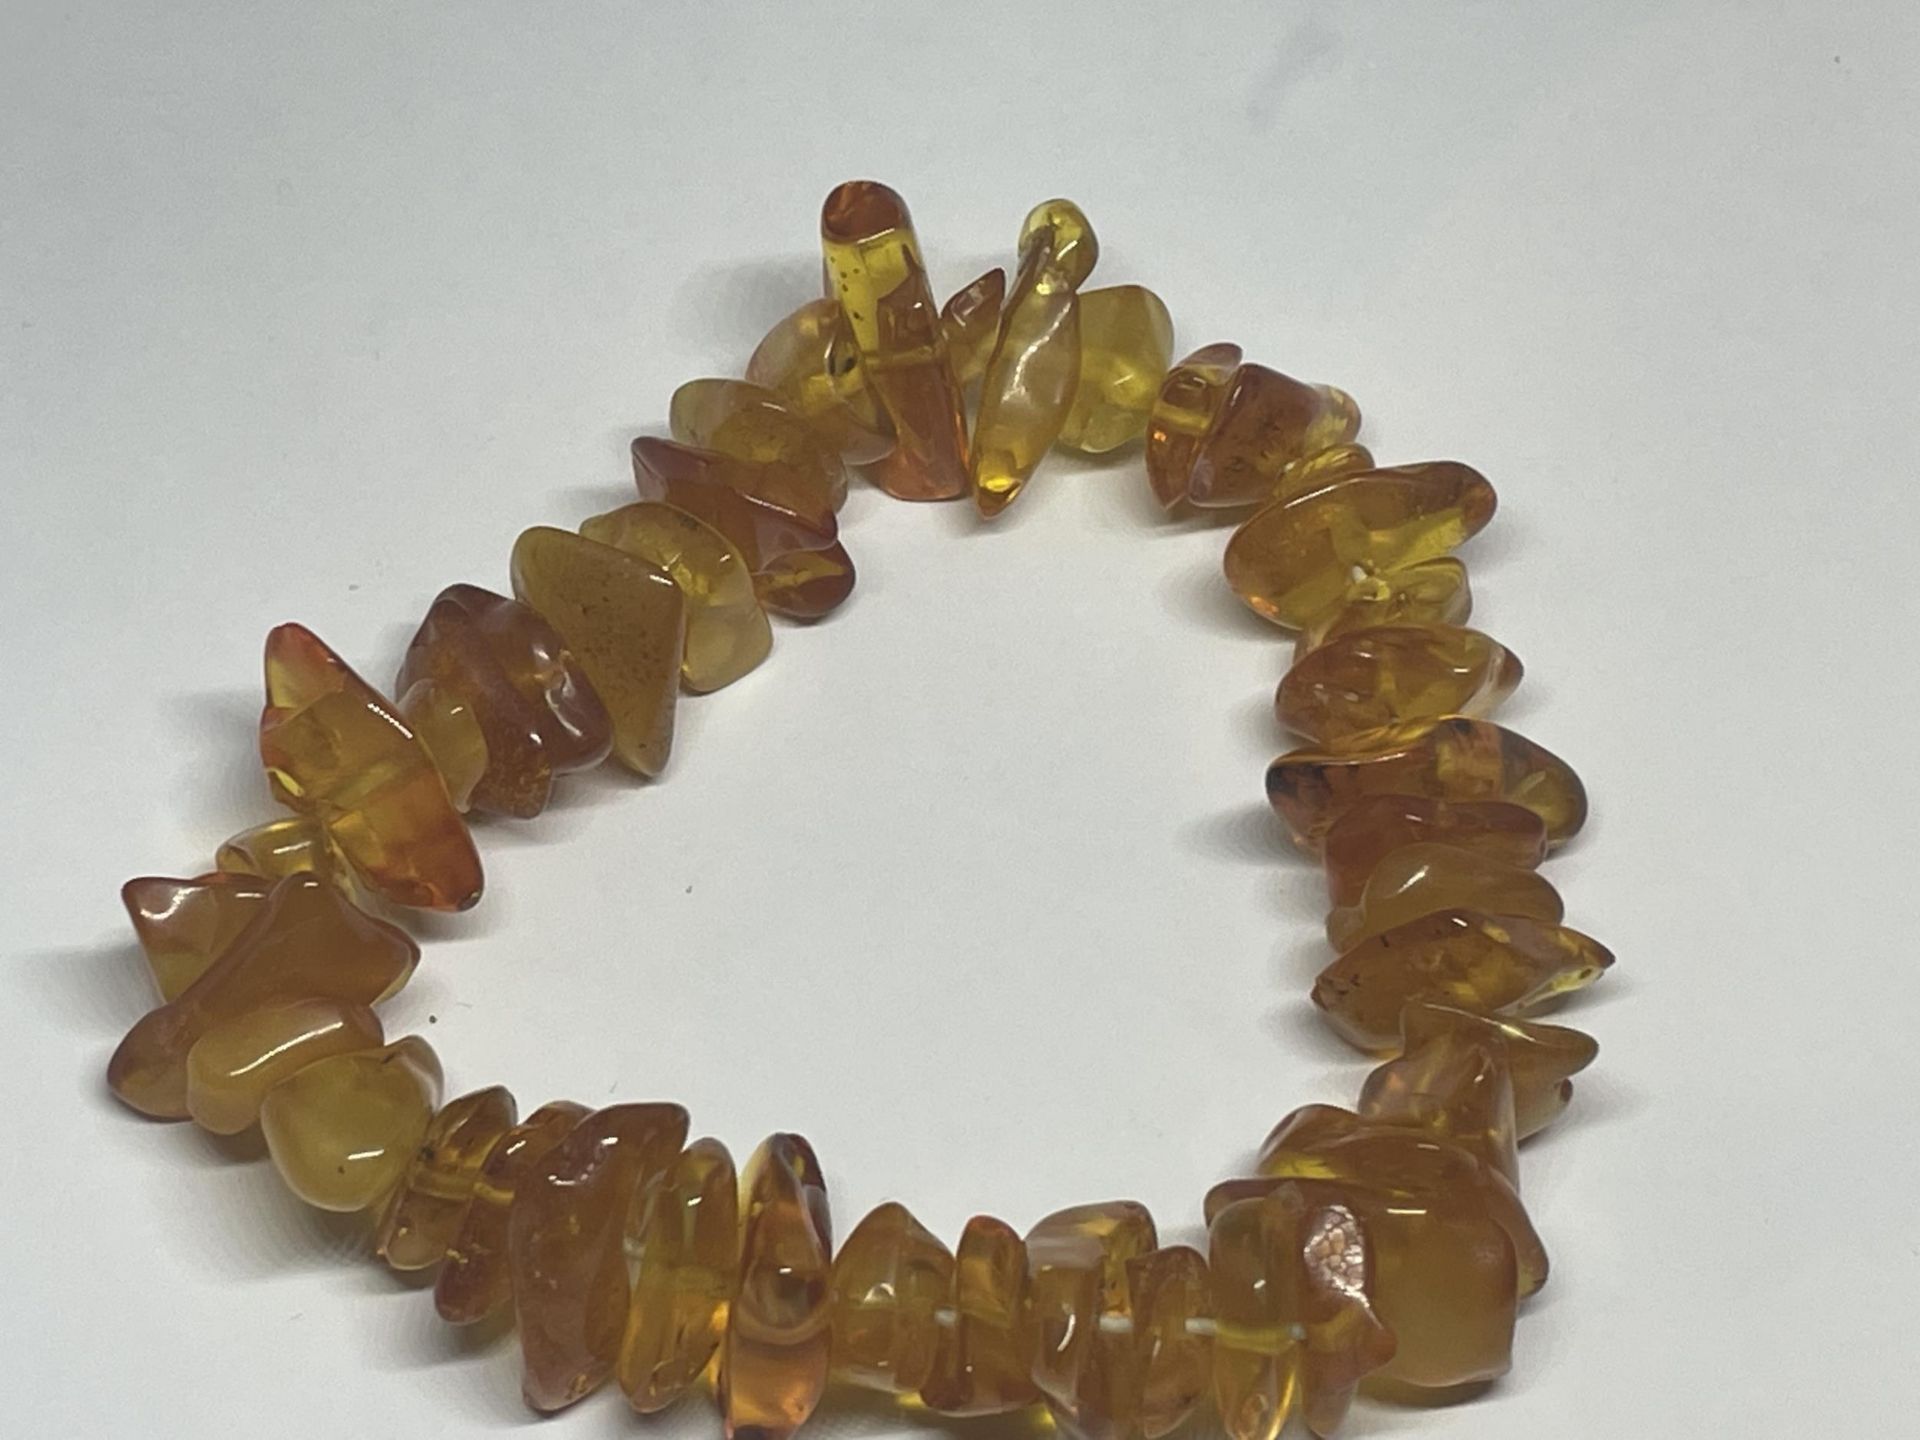 AN AMBER BRACELET WITH VARIOUS SHAPED STONES - Image 3 of 3